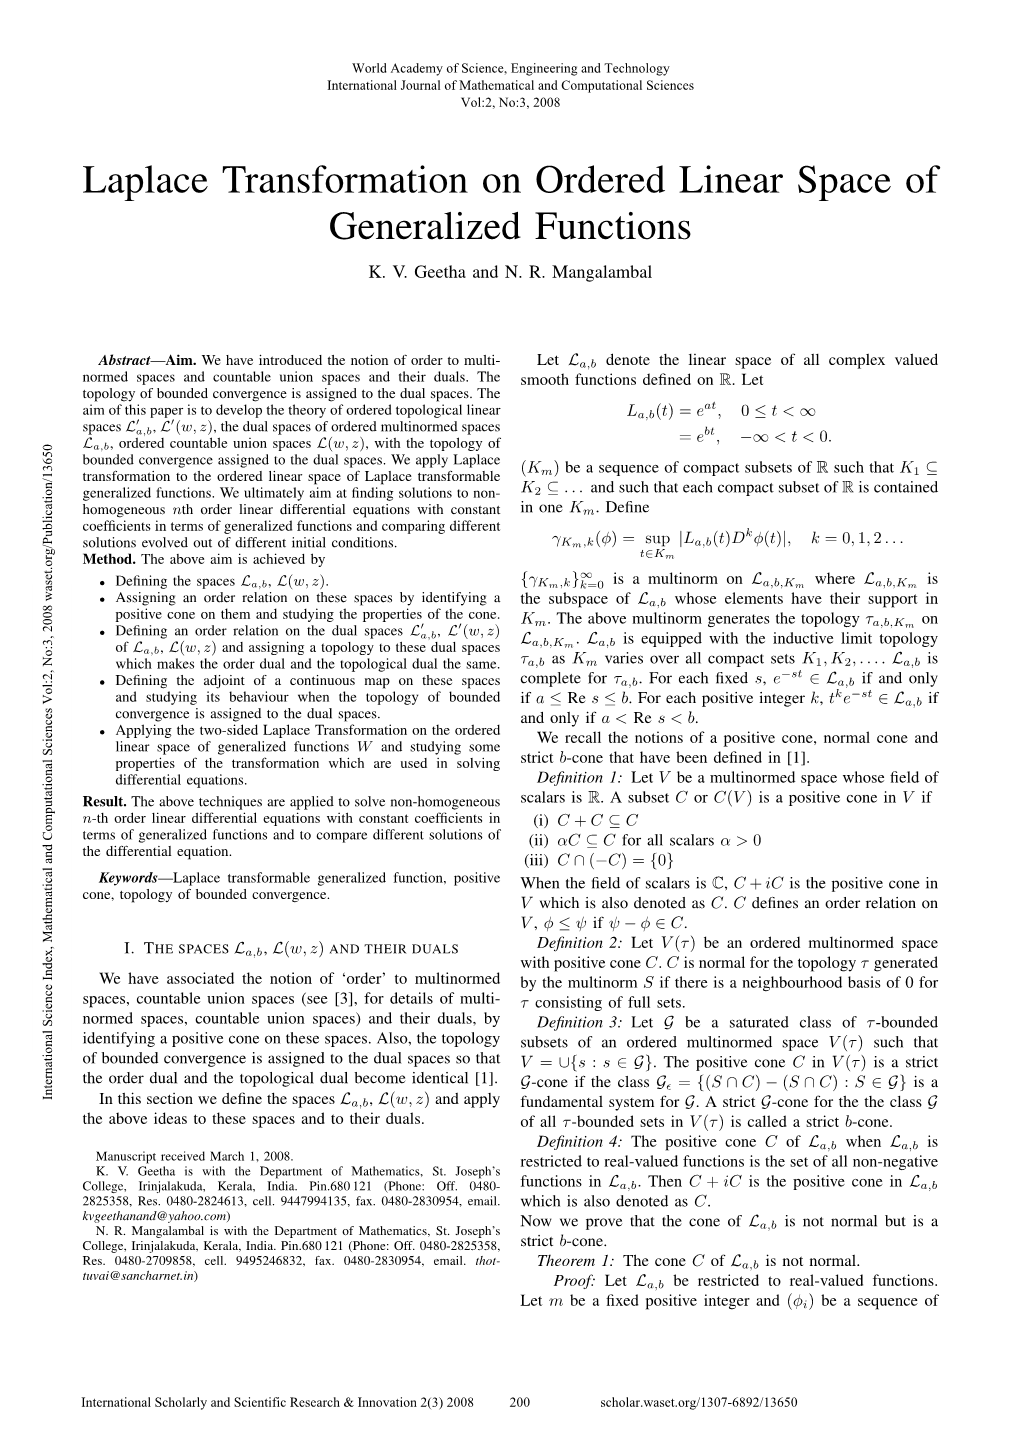 Laplace Transformation on Ordered Linear Space of Generalized Functions K